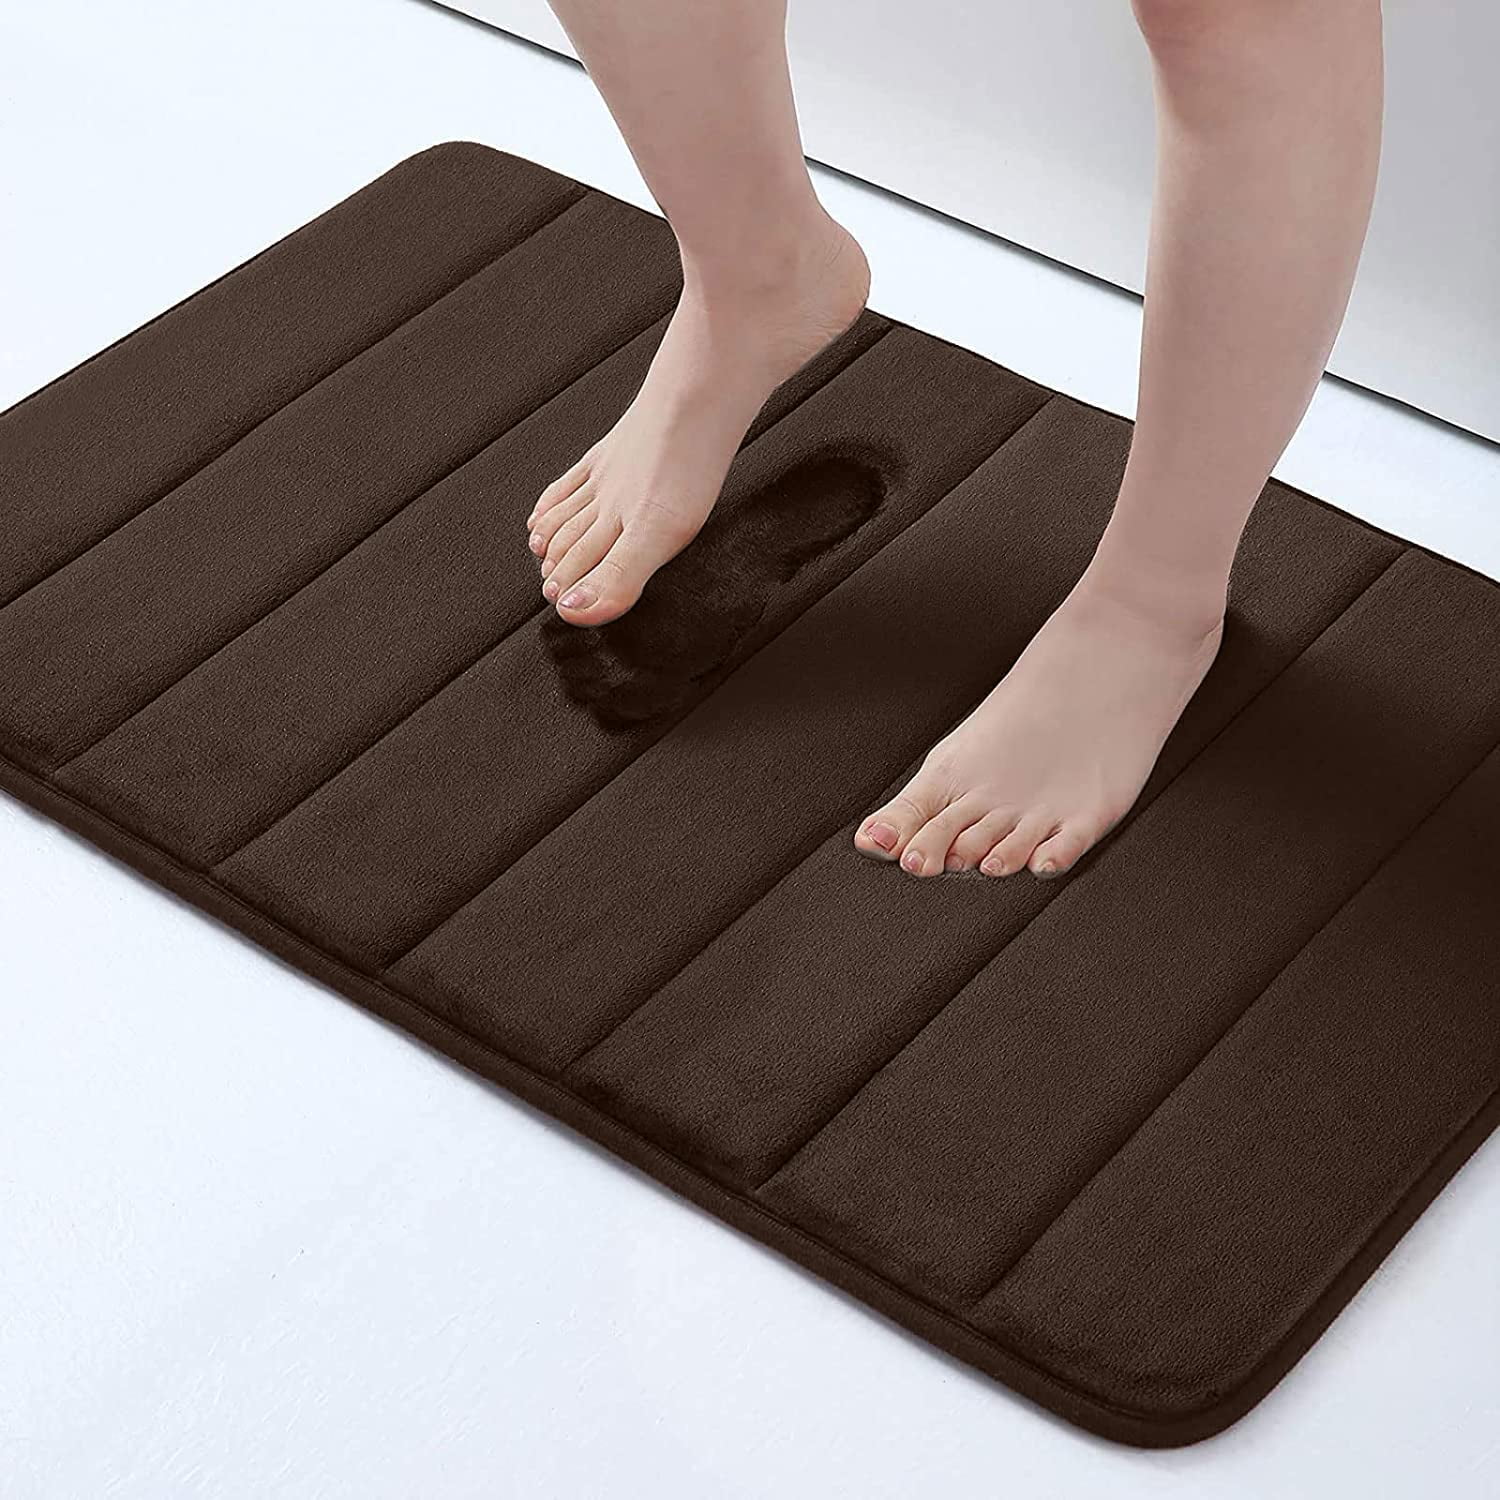 Roll Floor Bathroom Mat 2.7 ft. x 3.5 ft. Non-Slip Thermo-Treated